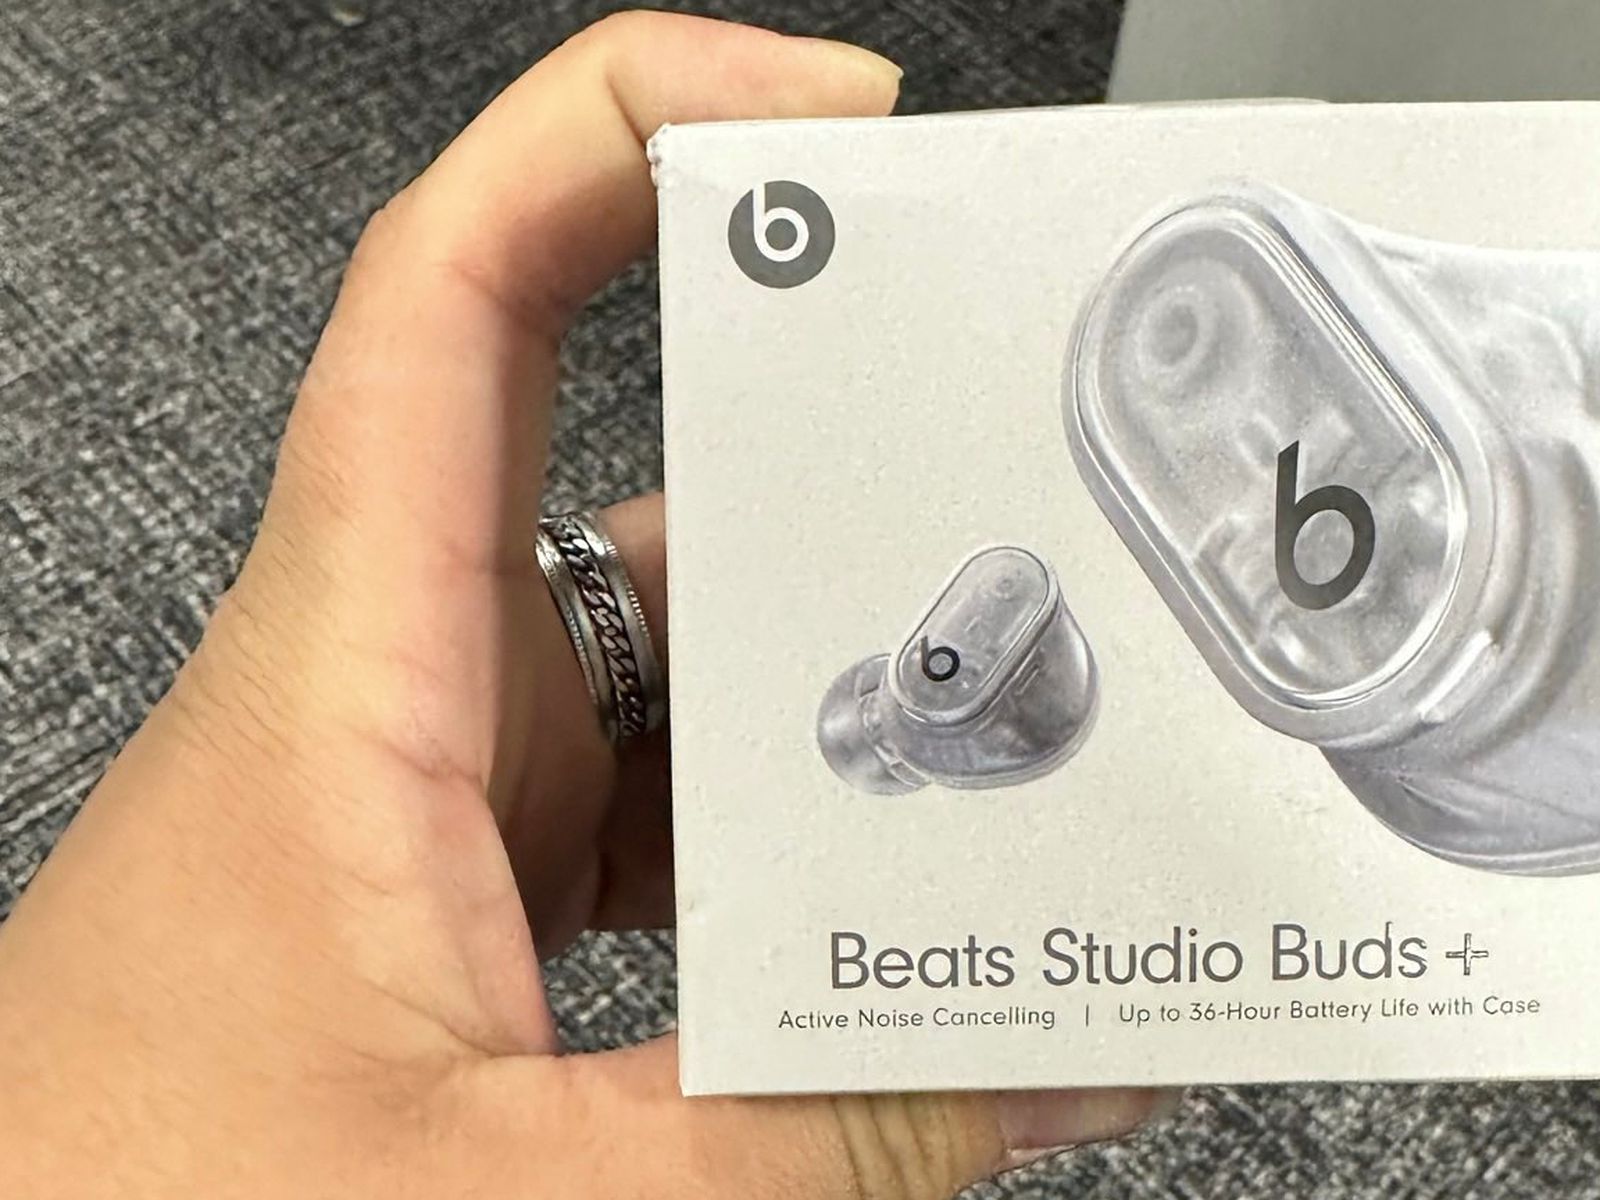 Beats Studio Buds+ With New Transparent Design Spotted at Best Buy